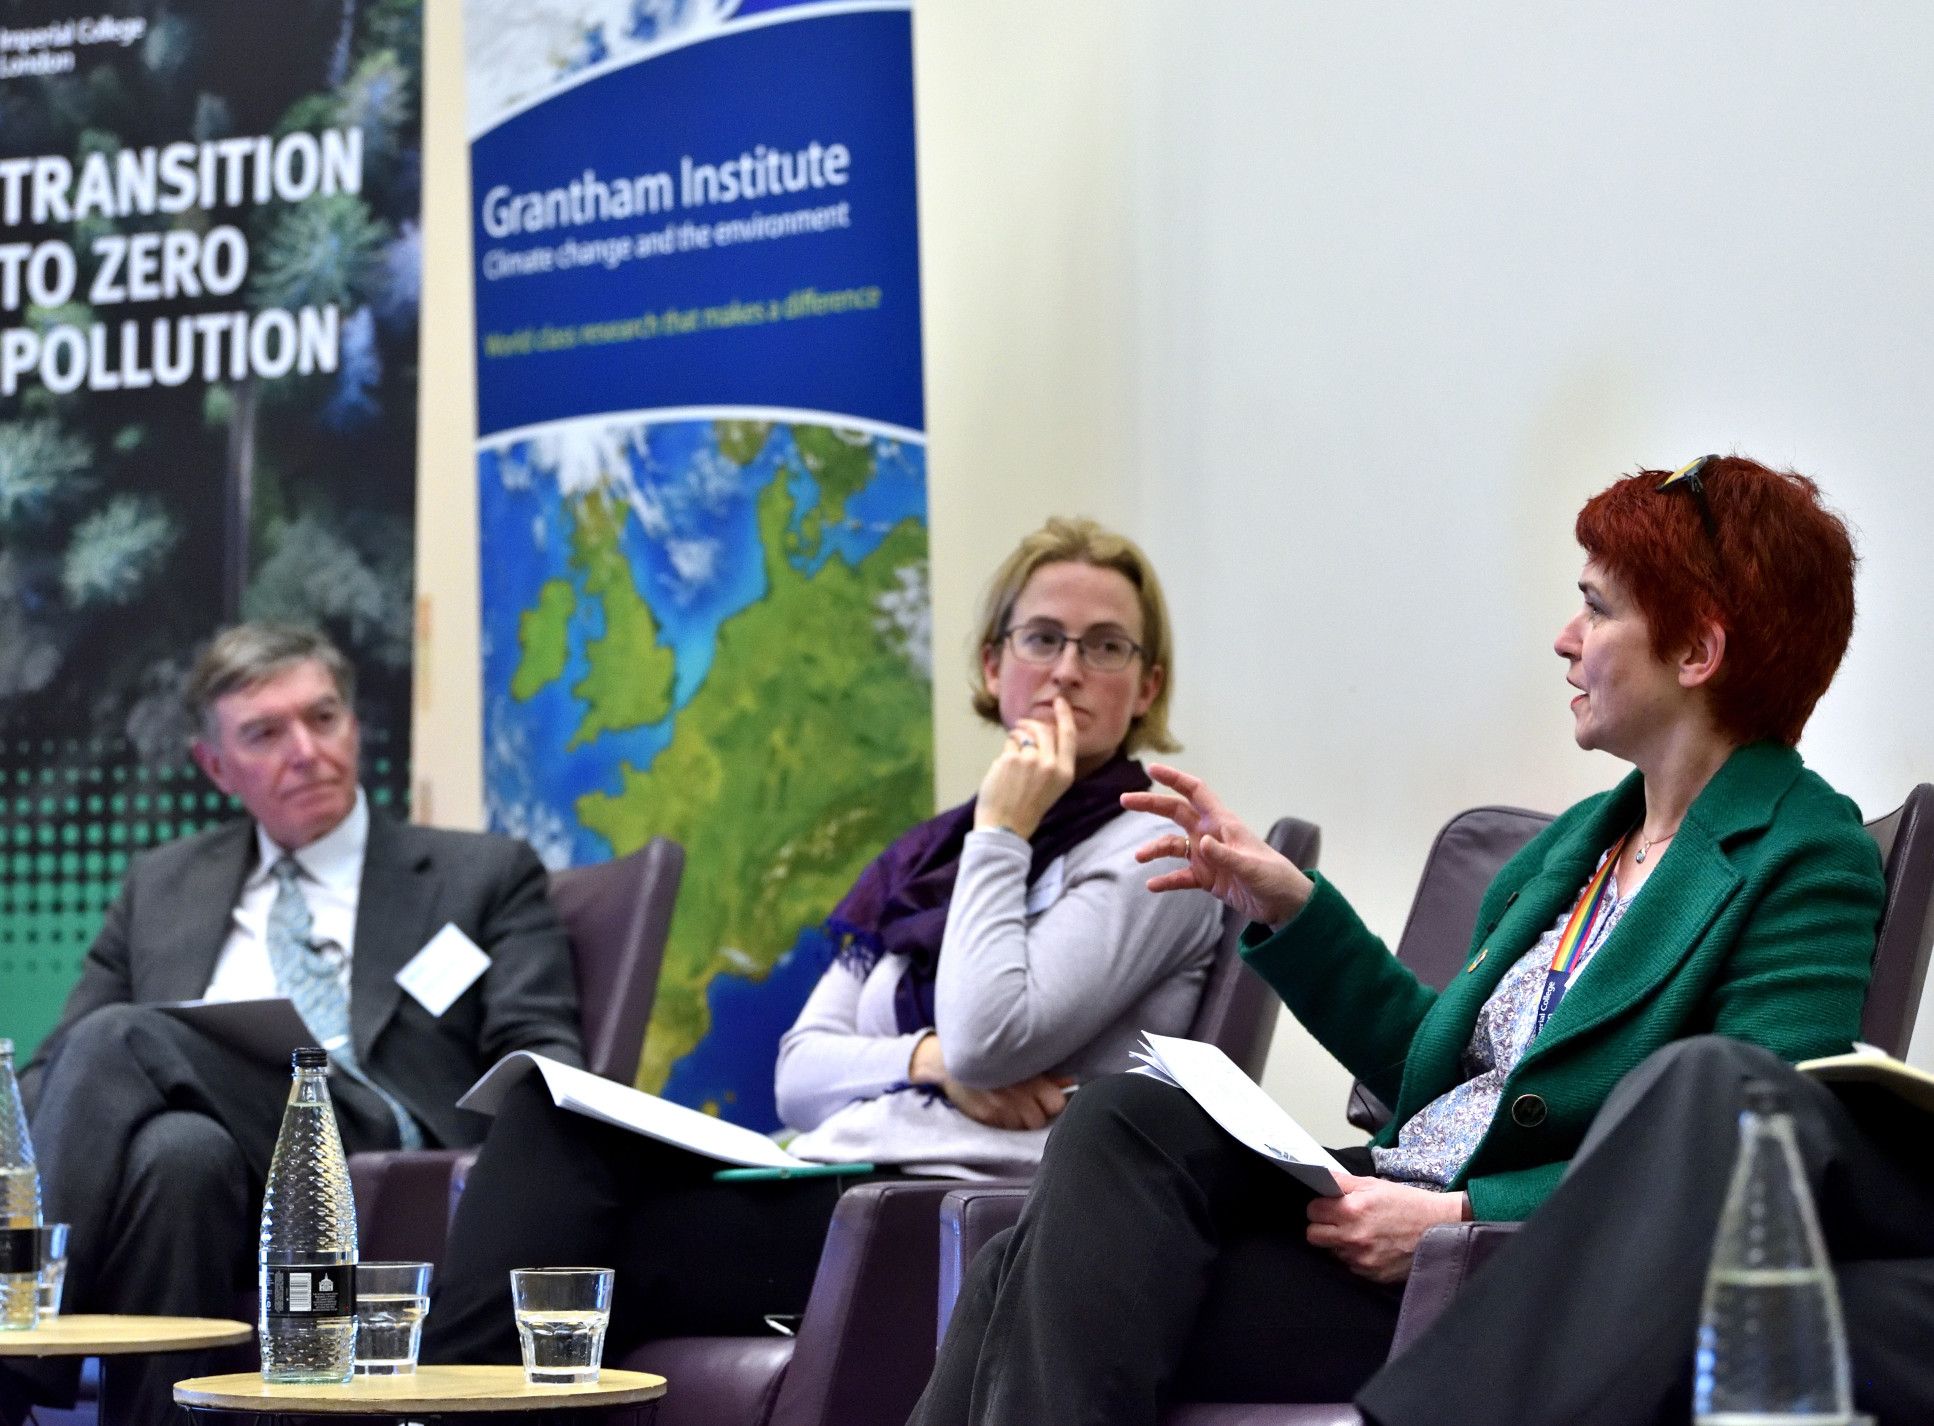 Professor Ryan on a panel led by the Environmental Audit Committee Chair at the EAC's 25th anniversary